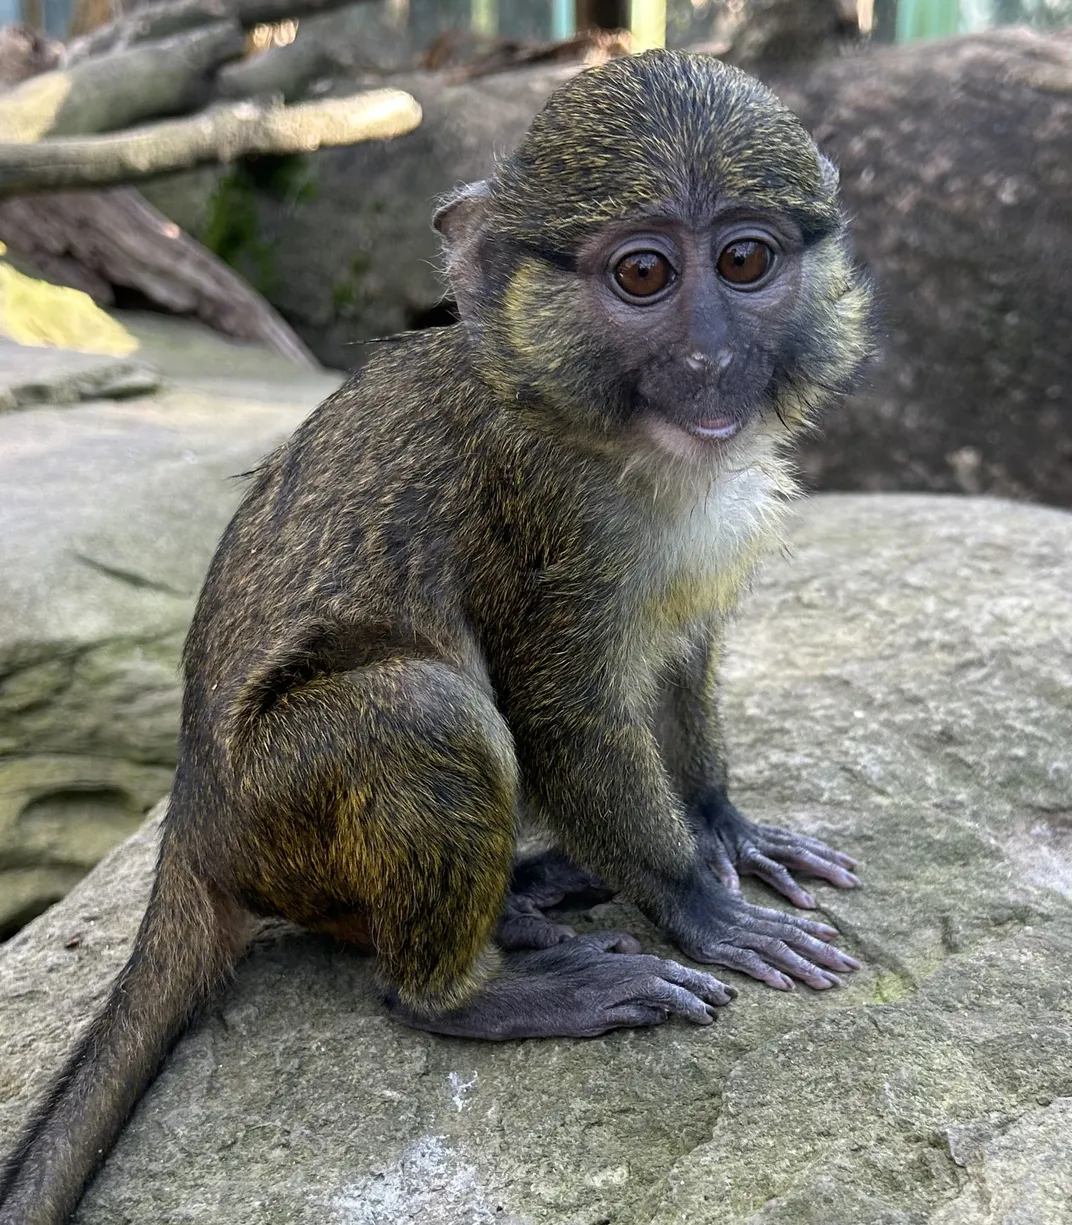 A small, grey-furred monkey perches on a rock.